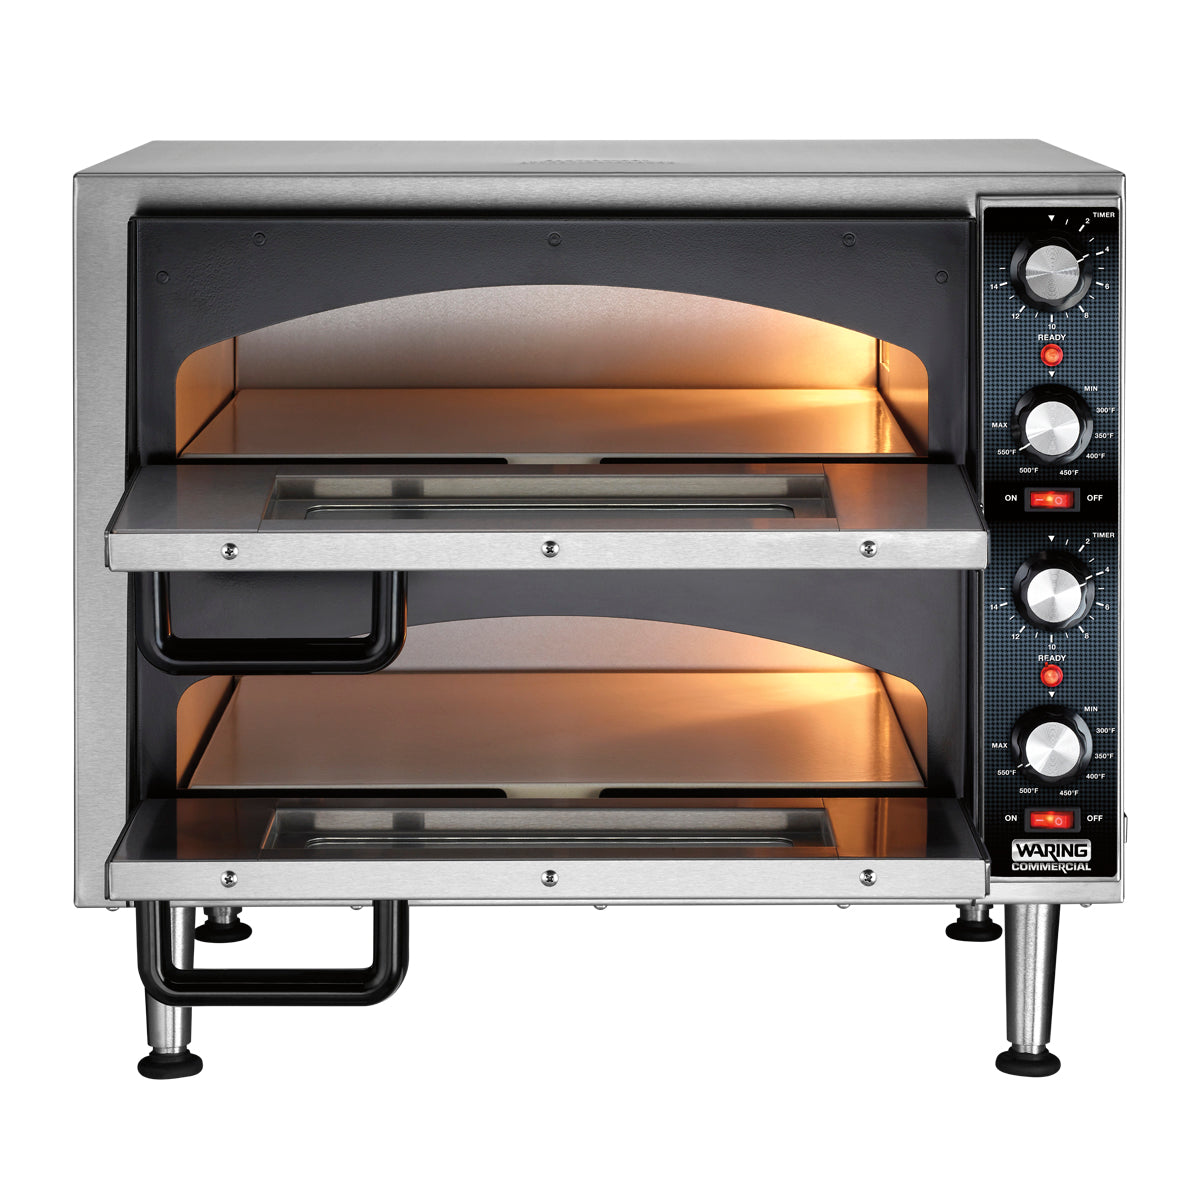 WPO350 Double-Deck Commercial Pizza Oven by Waring Commercial